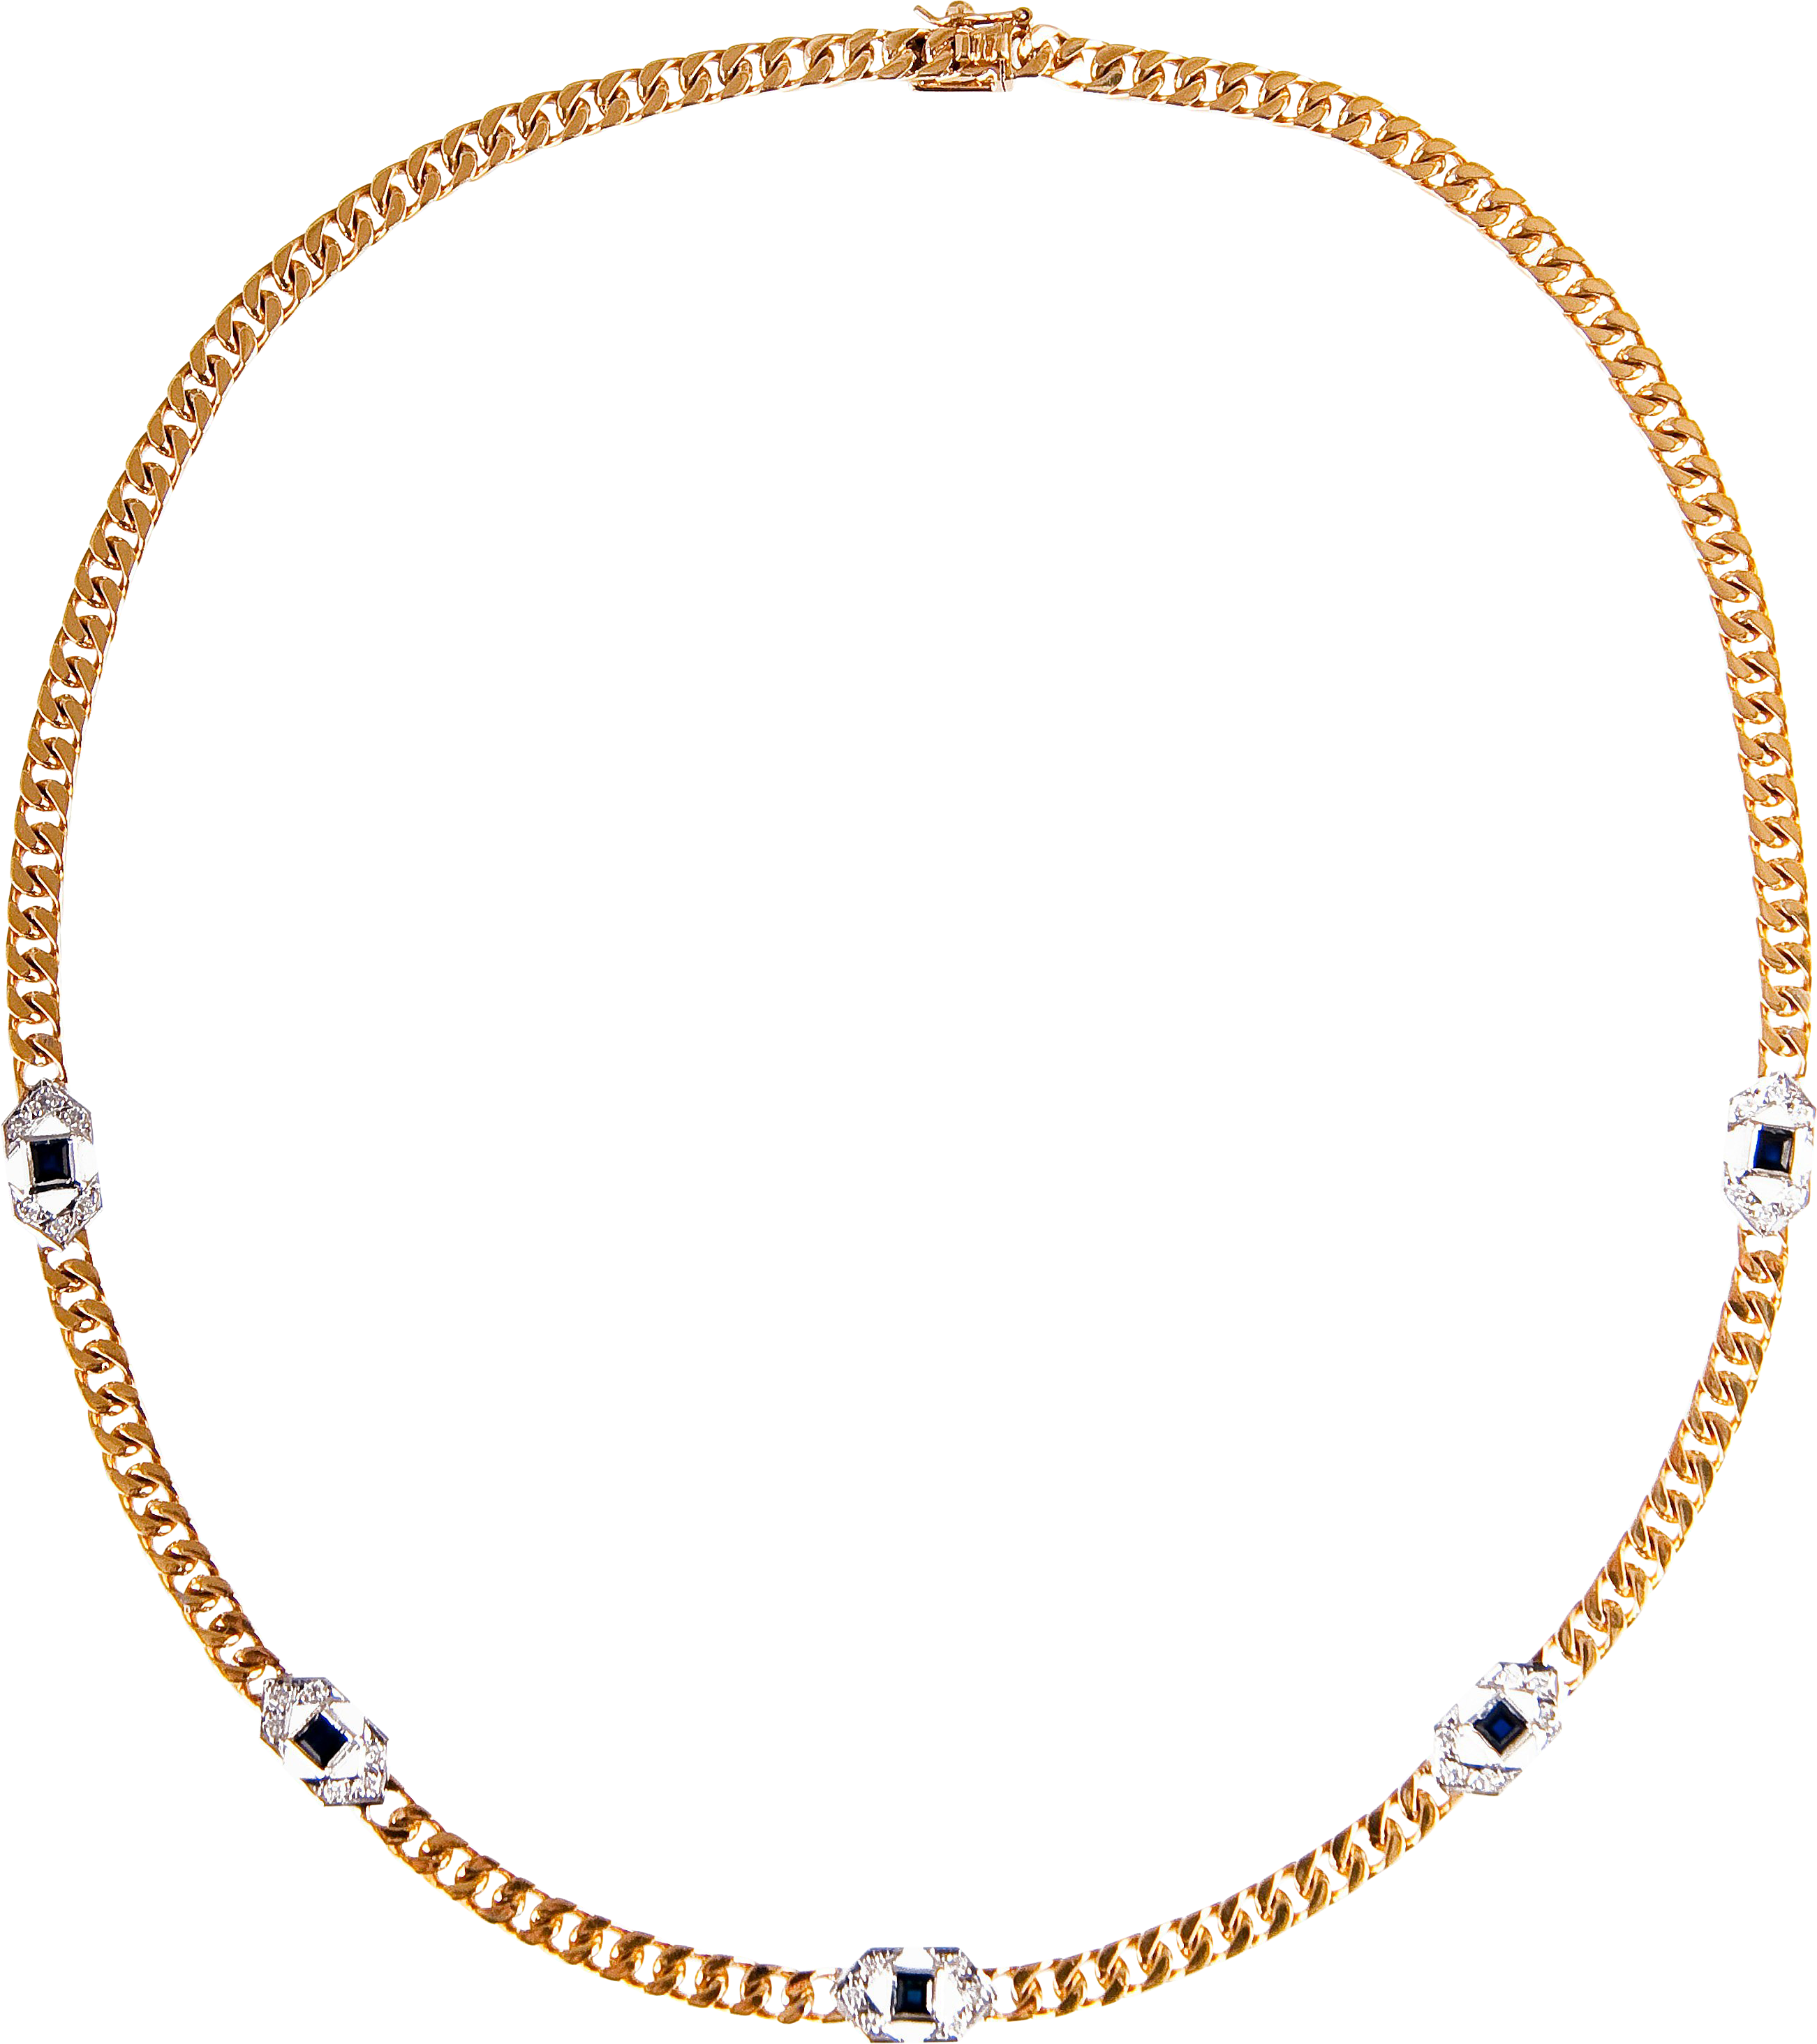 Necklace PNG images Download 